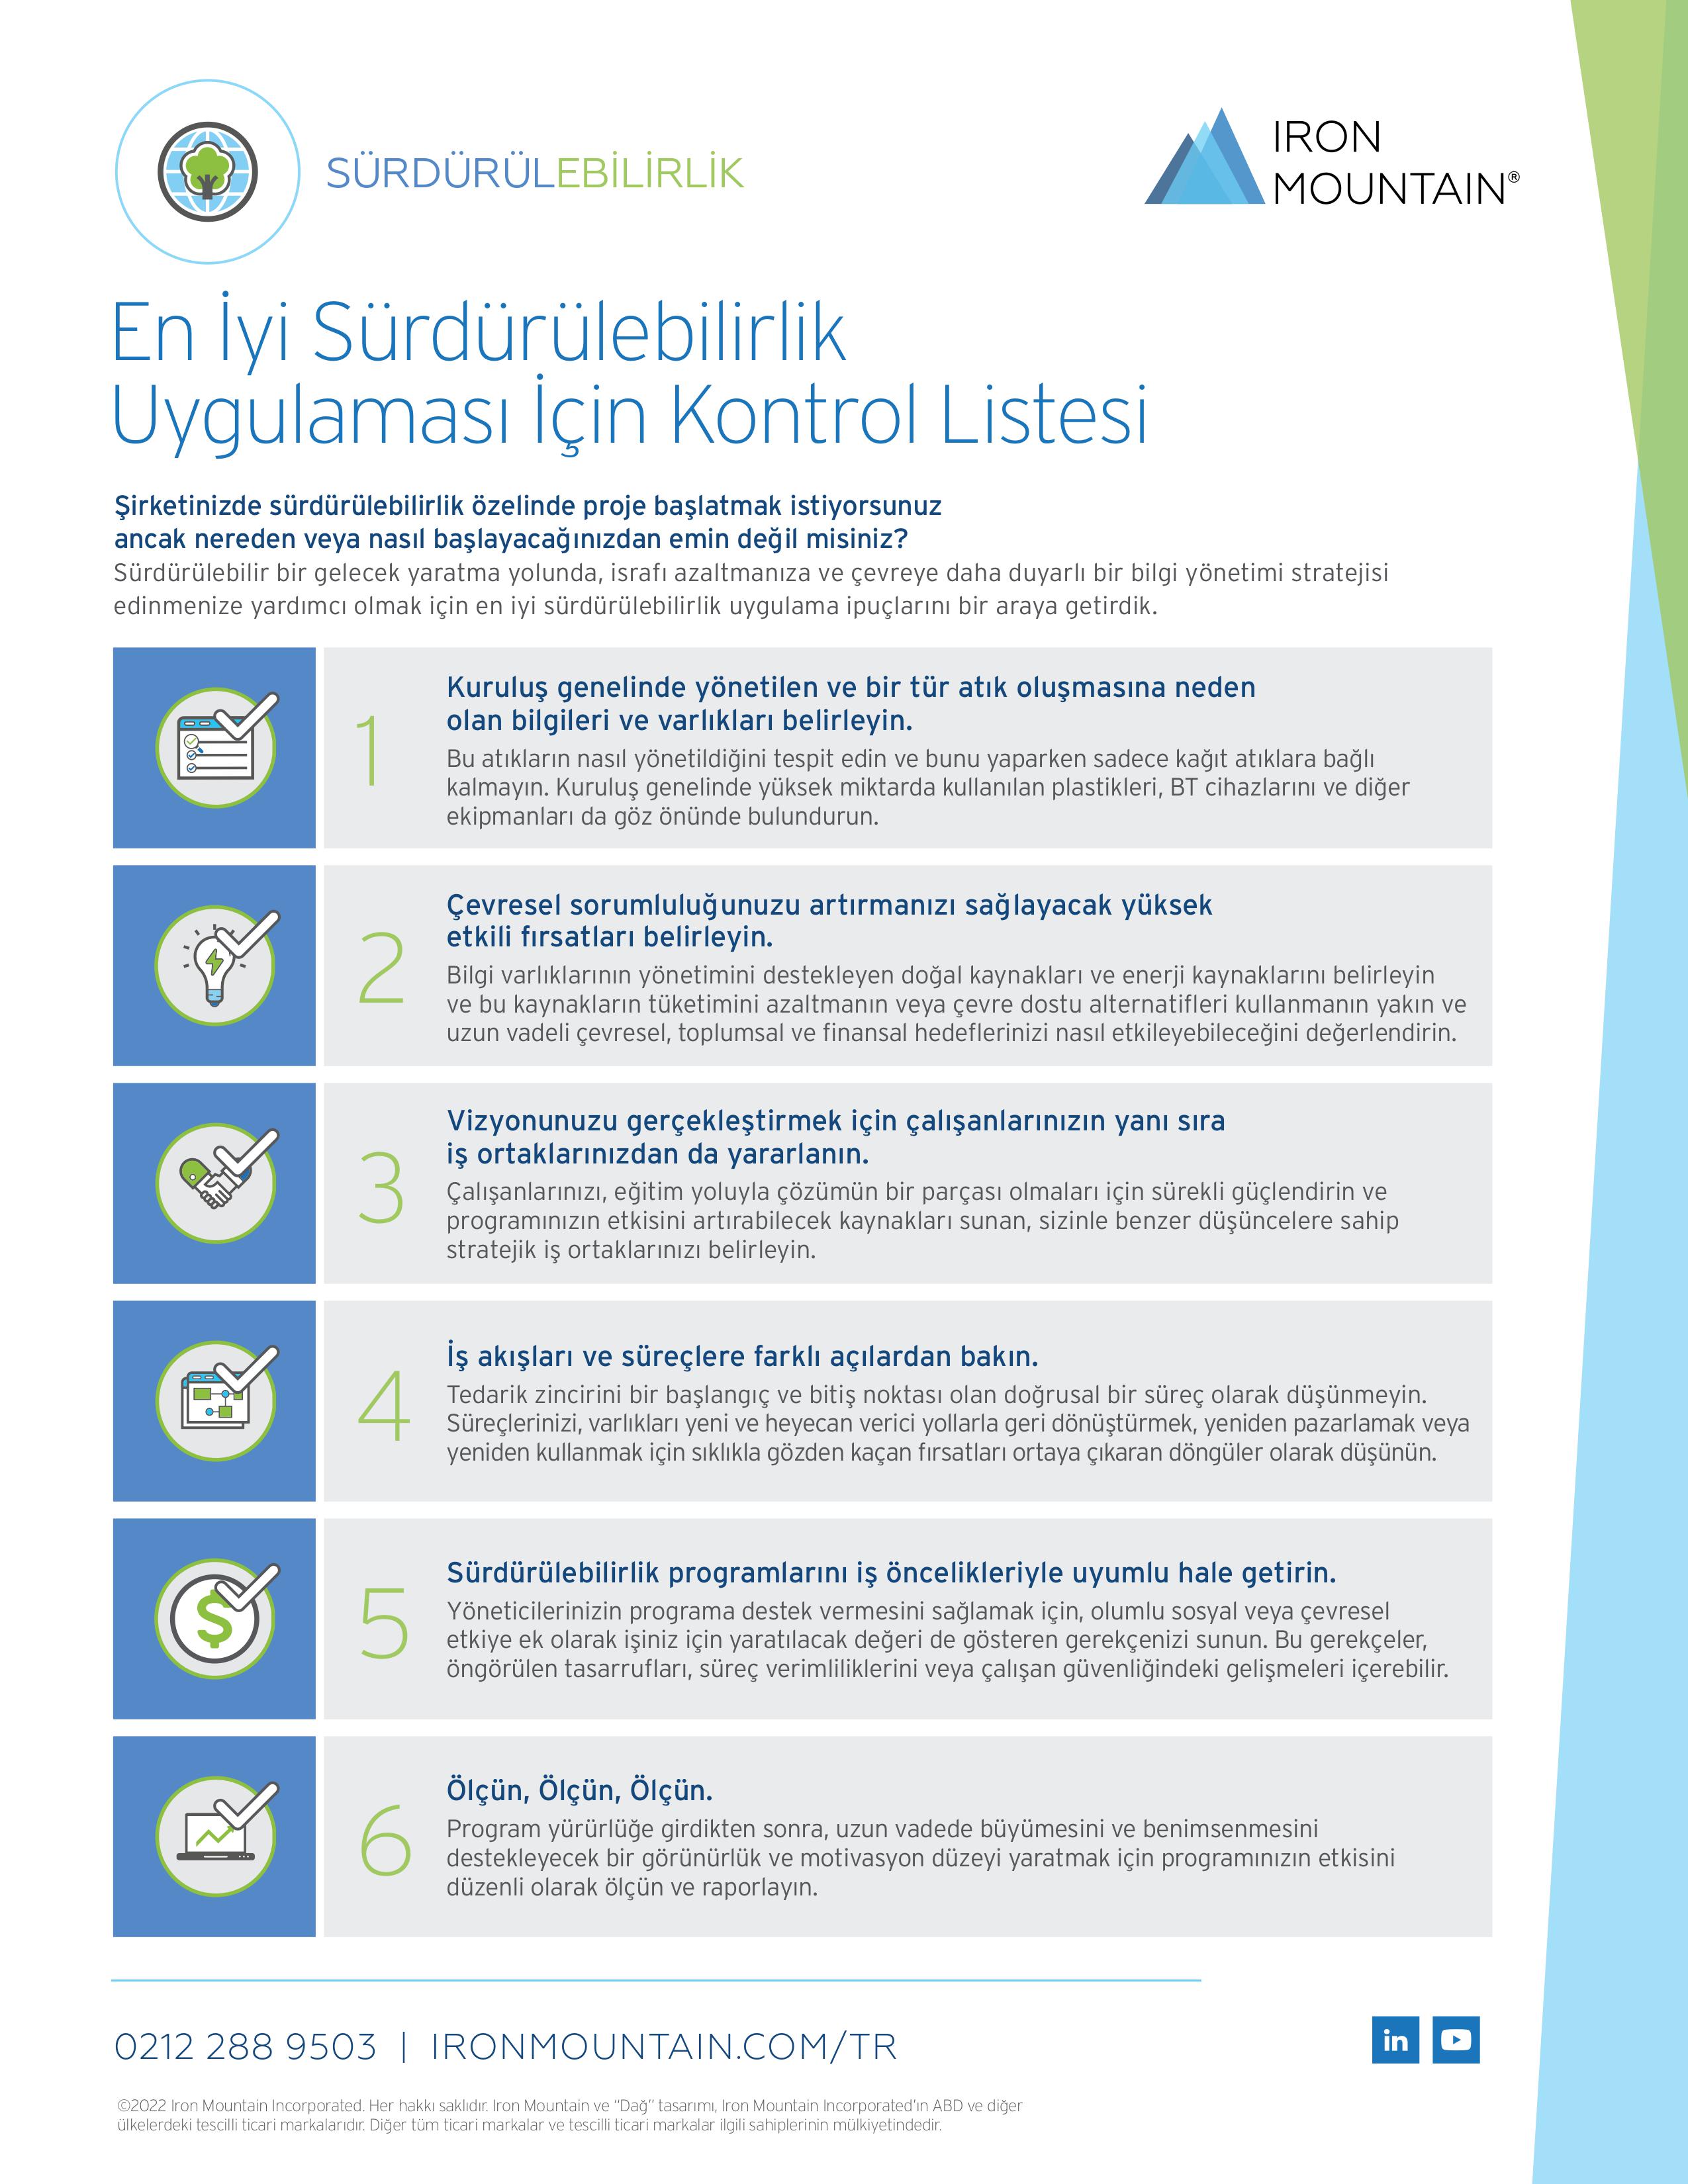 Checklist for Sustainability Best Practice infographic